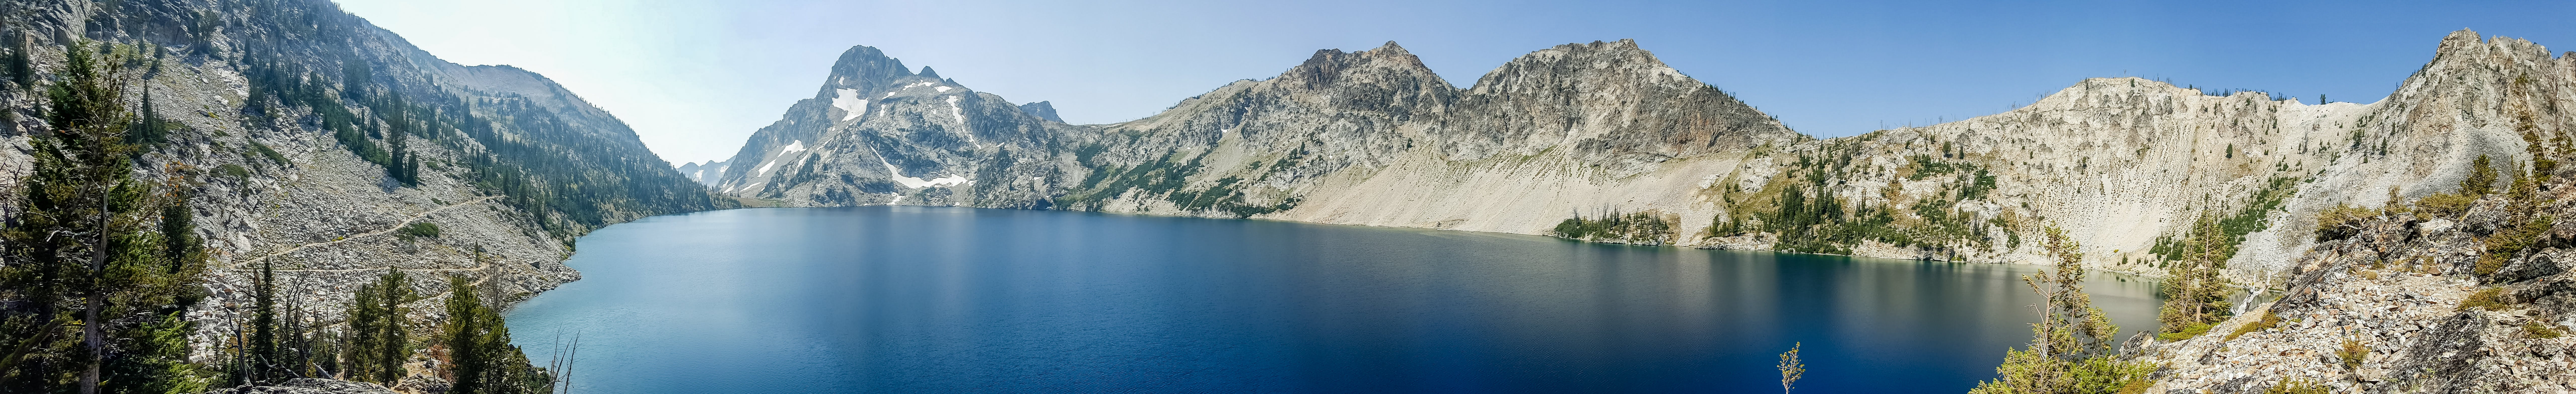 Panoramic of Sawtooth lake, Mid August and year around snow is still melting into the lake.